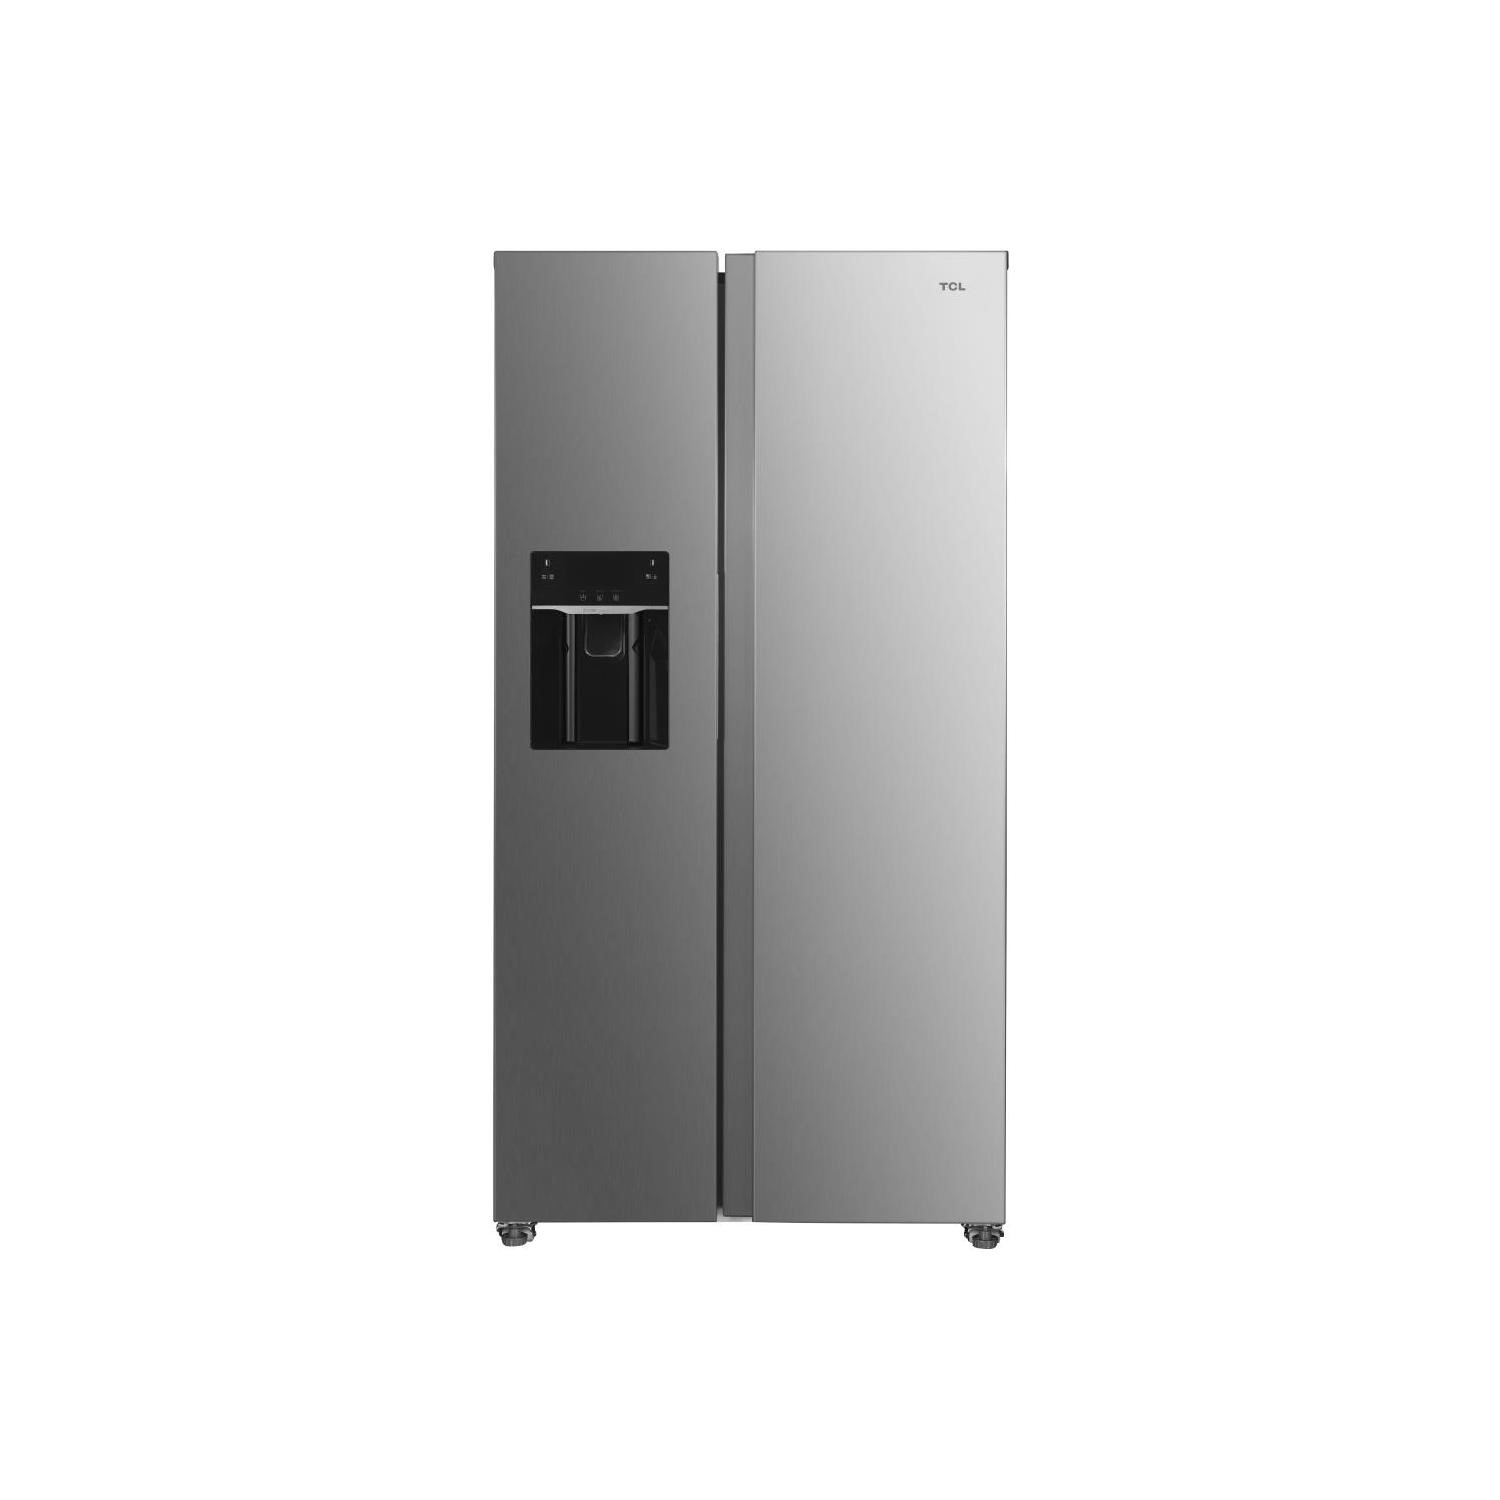 Photos - Other for Computer TCL 513 Litre Side-By-Side American Fridge Freezer with Water Dispense RC5 